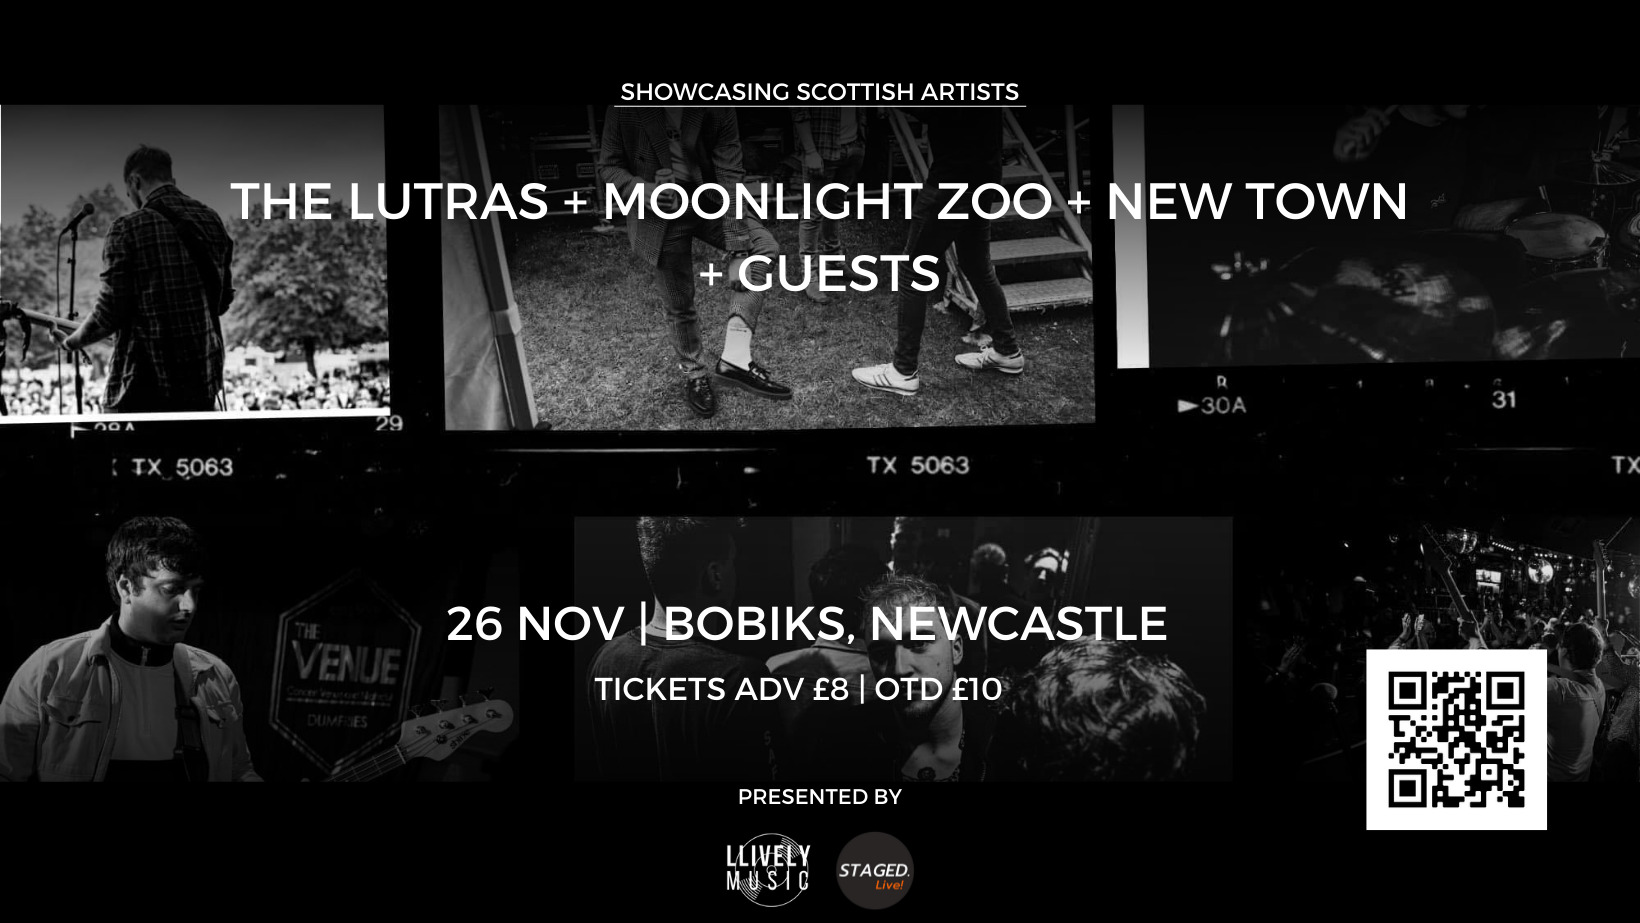 The Lutras, Moonlight Zoo, New Town + Guests